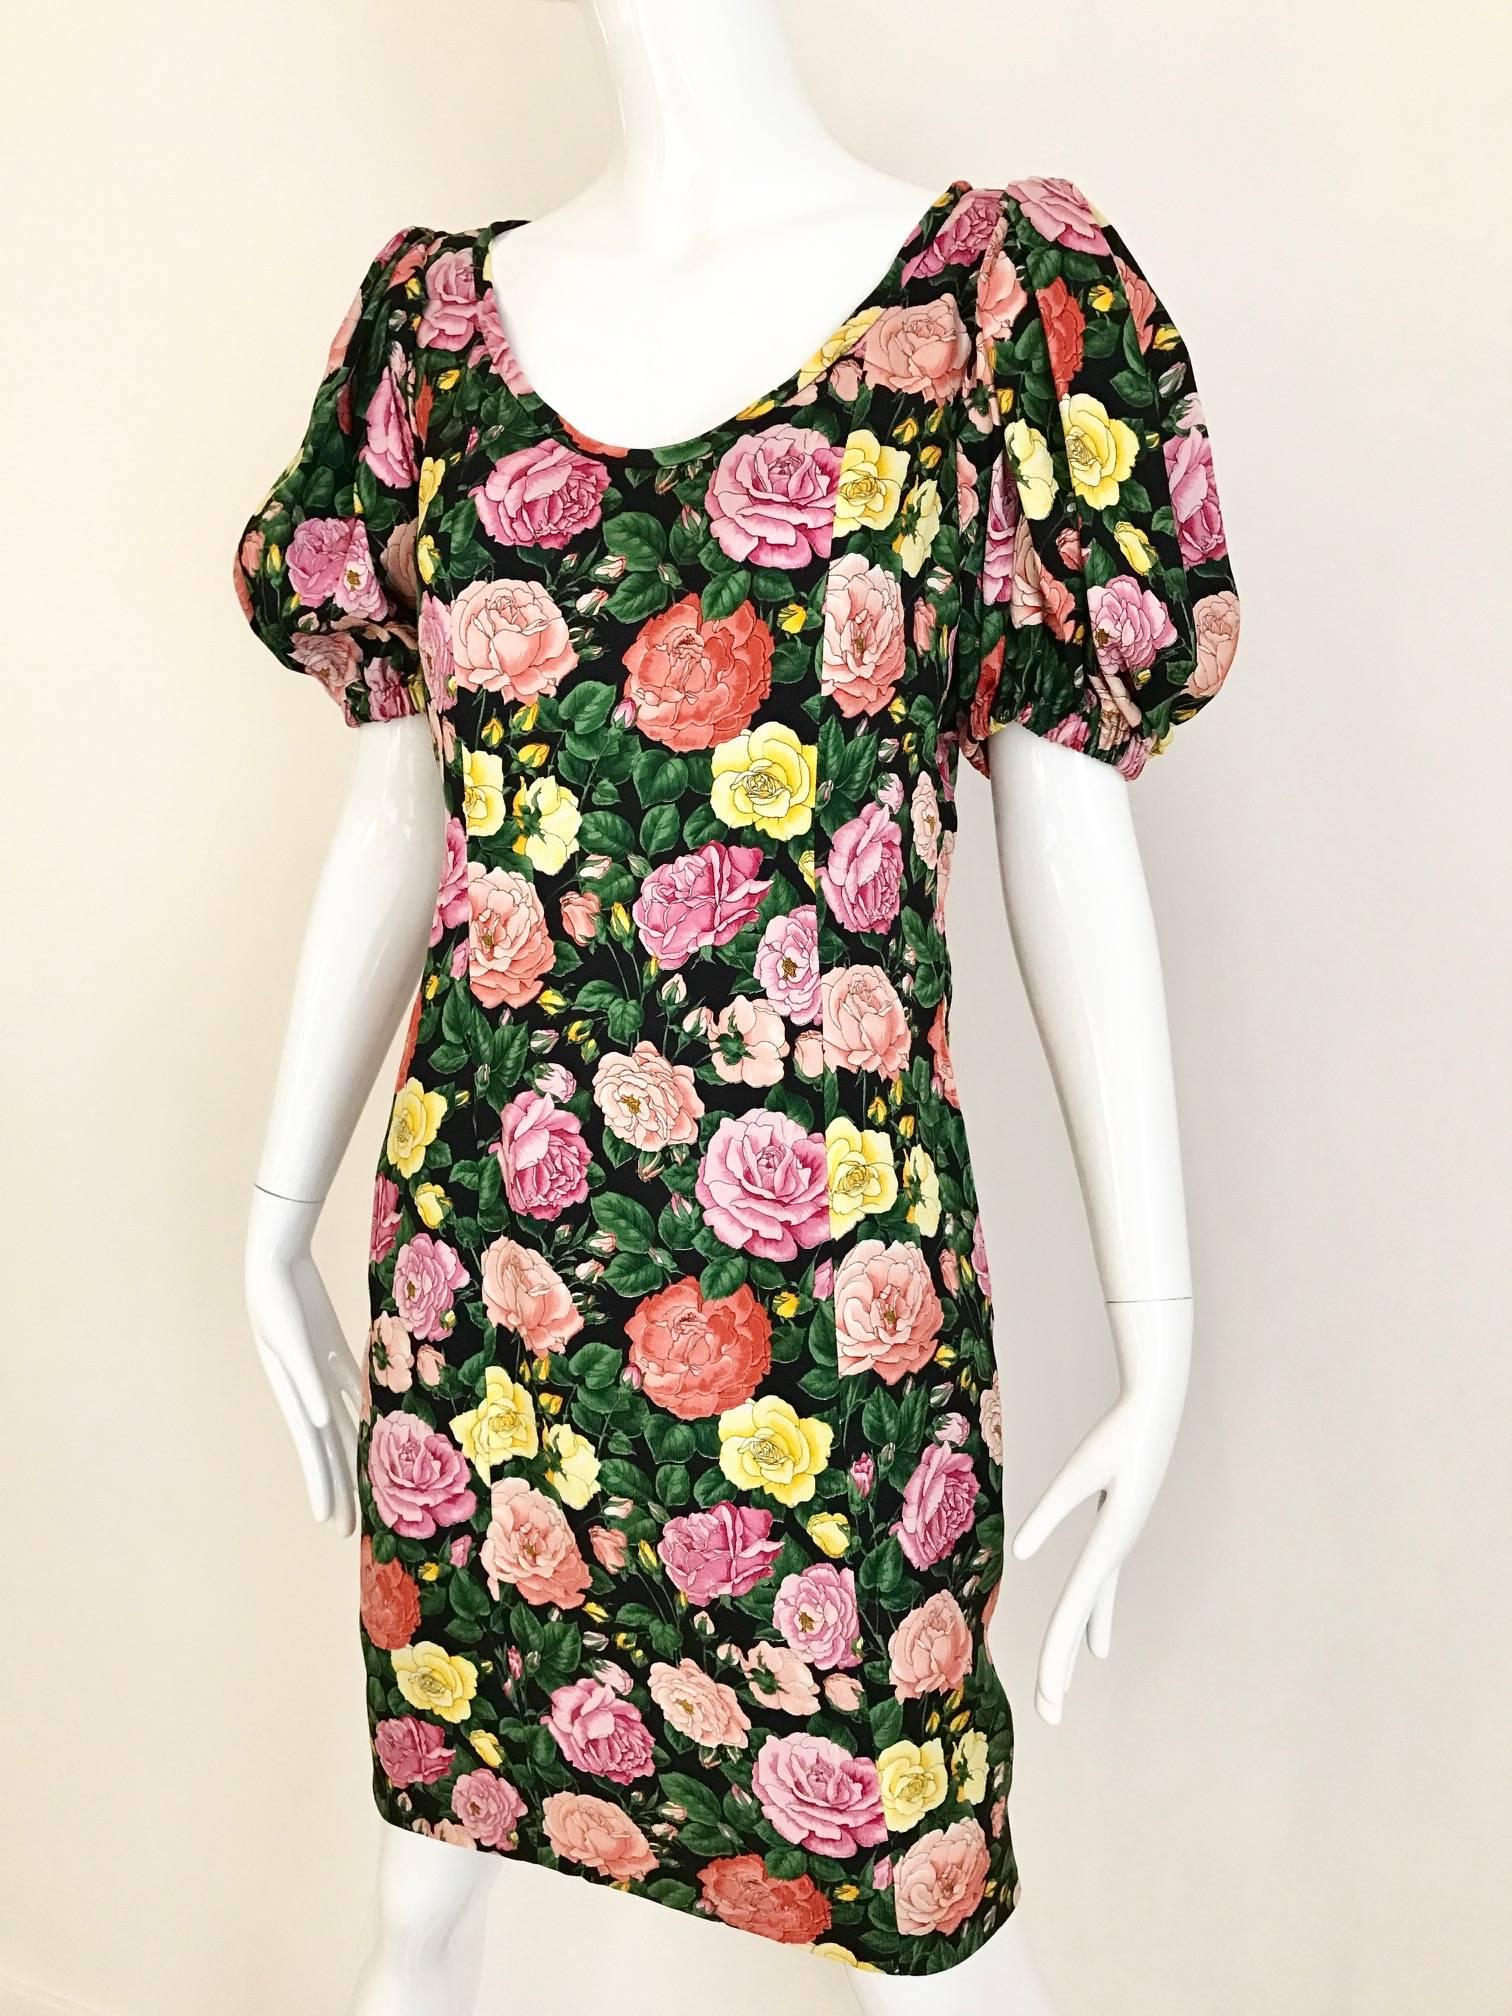 90s Yves saint Laurent rive gauche in pink, green, yellow and red rose print shift dress with puffy sleeve. Invisible side zipper and scoop neckline. (see ad campaign attached. Similar dress as worn by supermodel Karen Mulder shot by legendary